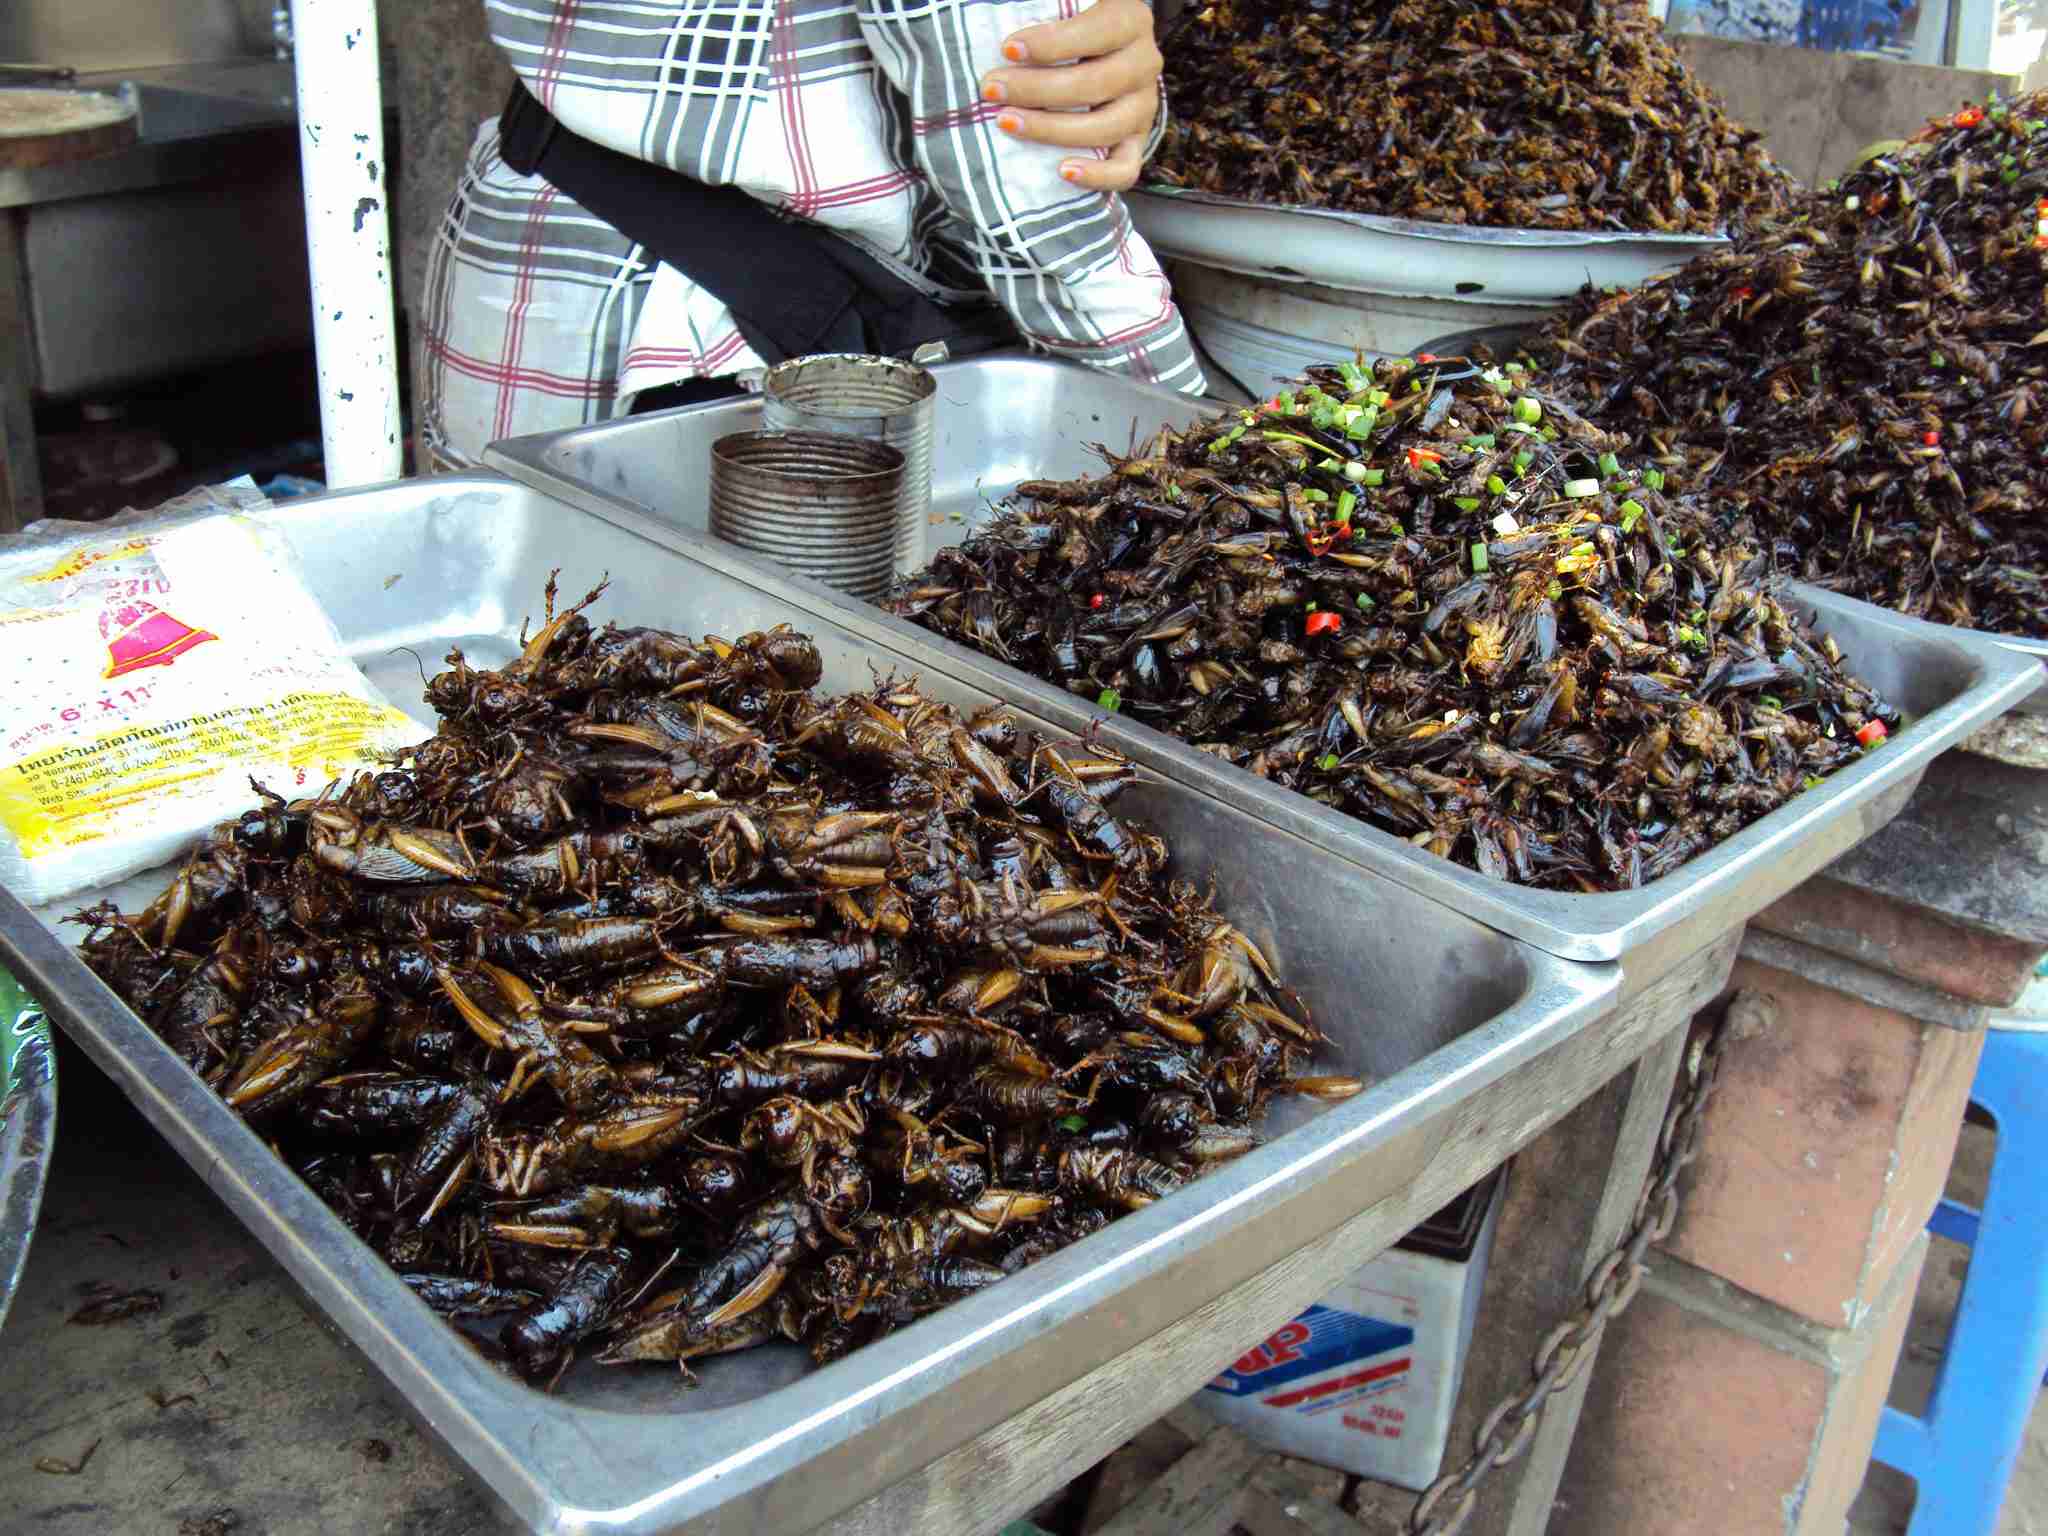 Boiled or grilled beetles, spiders, grasshoppers ...